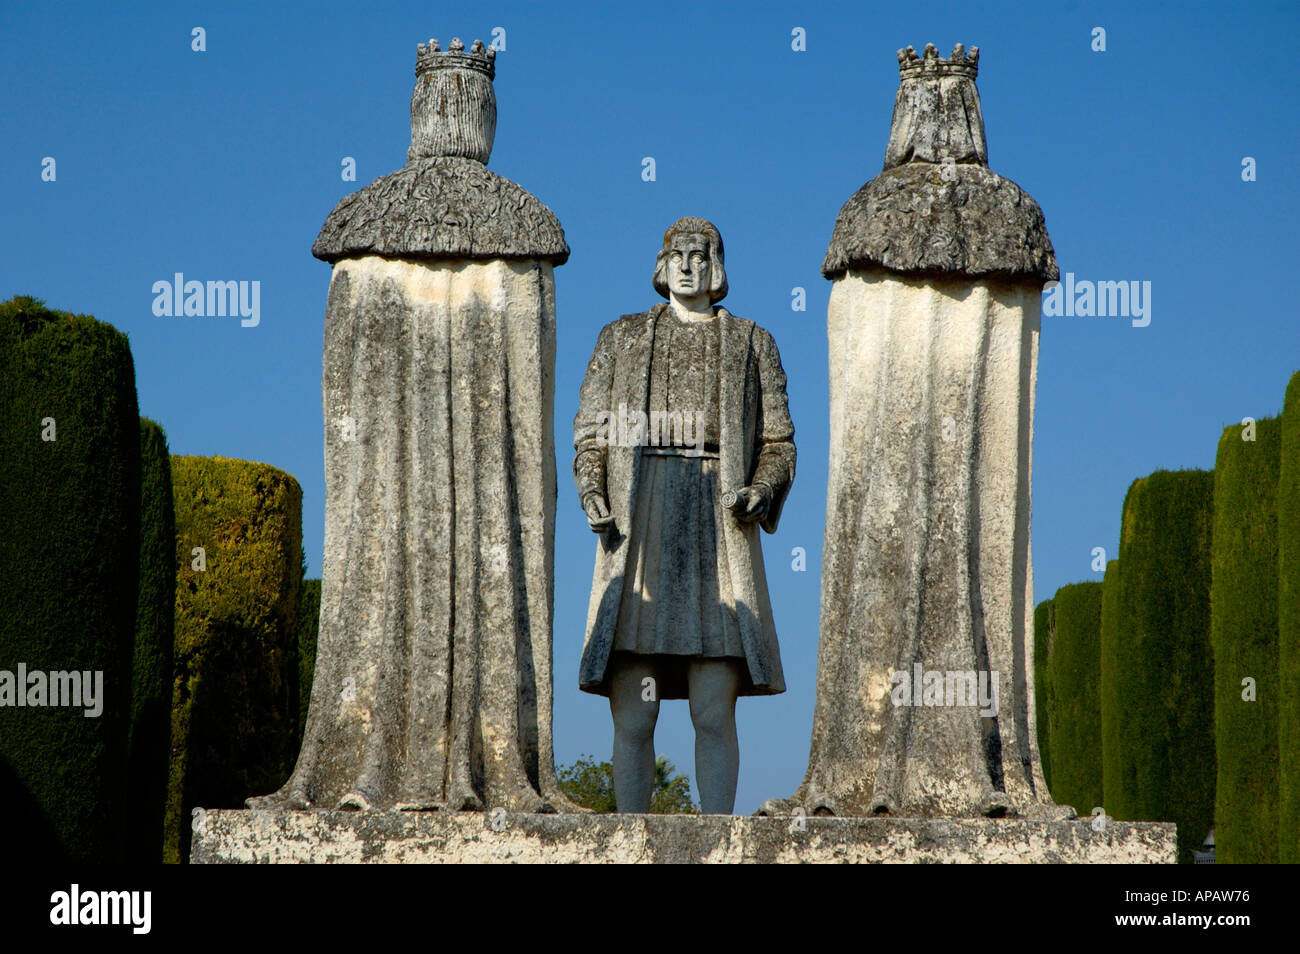 Statues depicting Christopher Columbus talking with King Ferdinand II of Aragon, in the gardens of the Alcazar de Cordoba, Spain Stock Photo